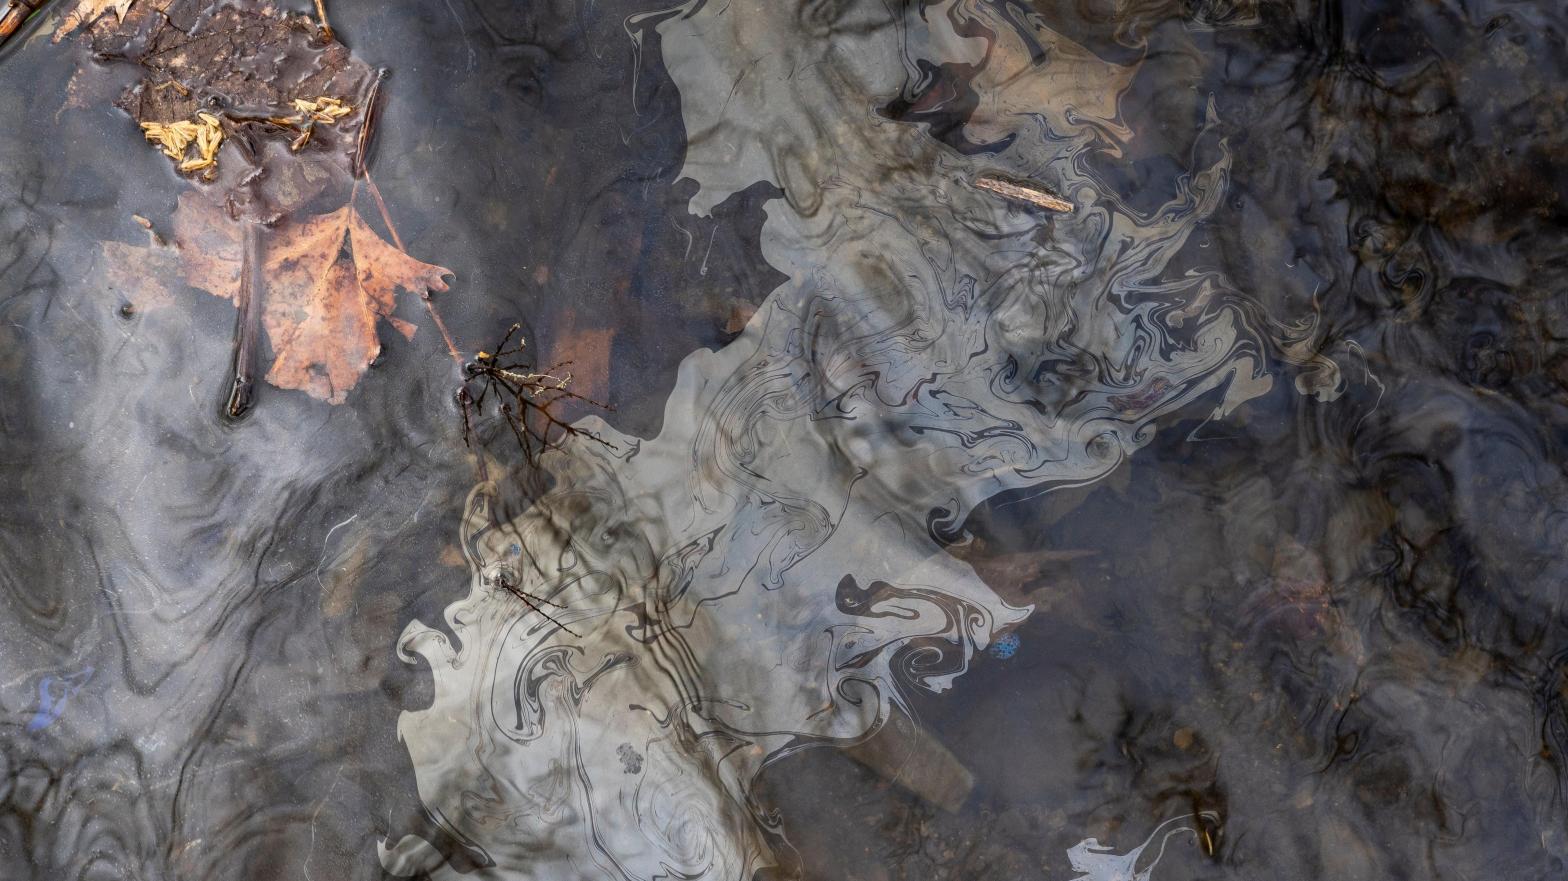 Chemicals float on the top of the water in Leslie Run creek after being agitated from the sediment on the bottom of the creek on February 20, 2023 in East Palestine, Ohio. (Photo: Michael Swensen, Getty Images)